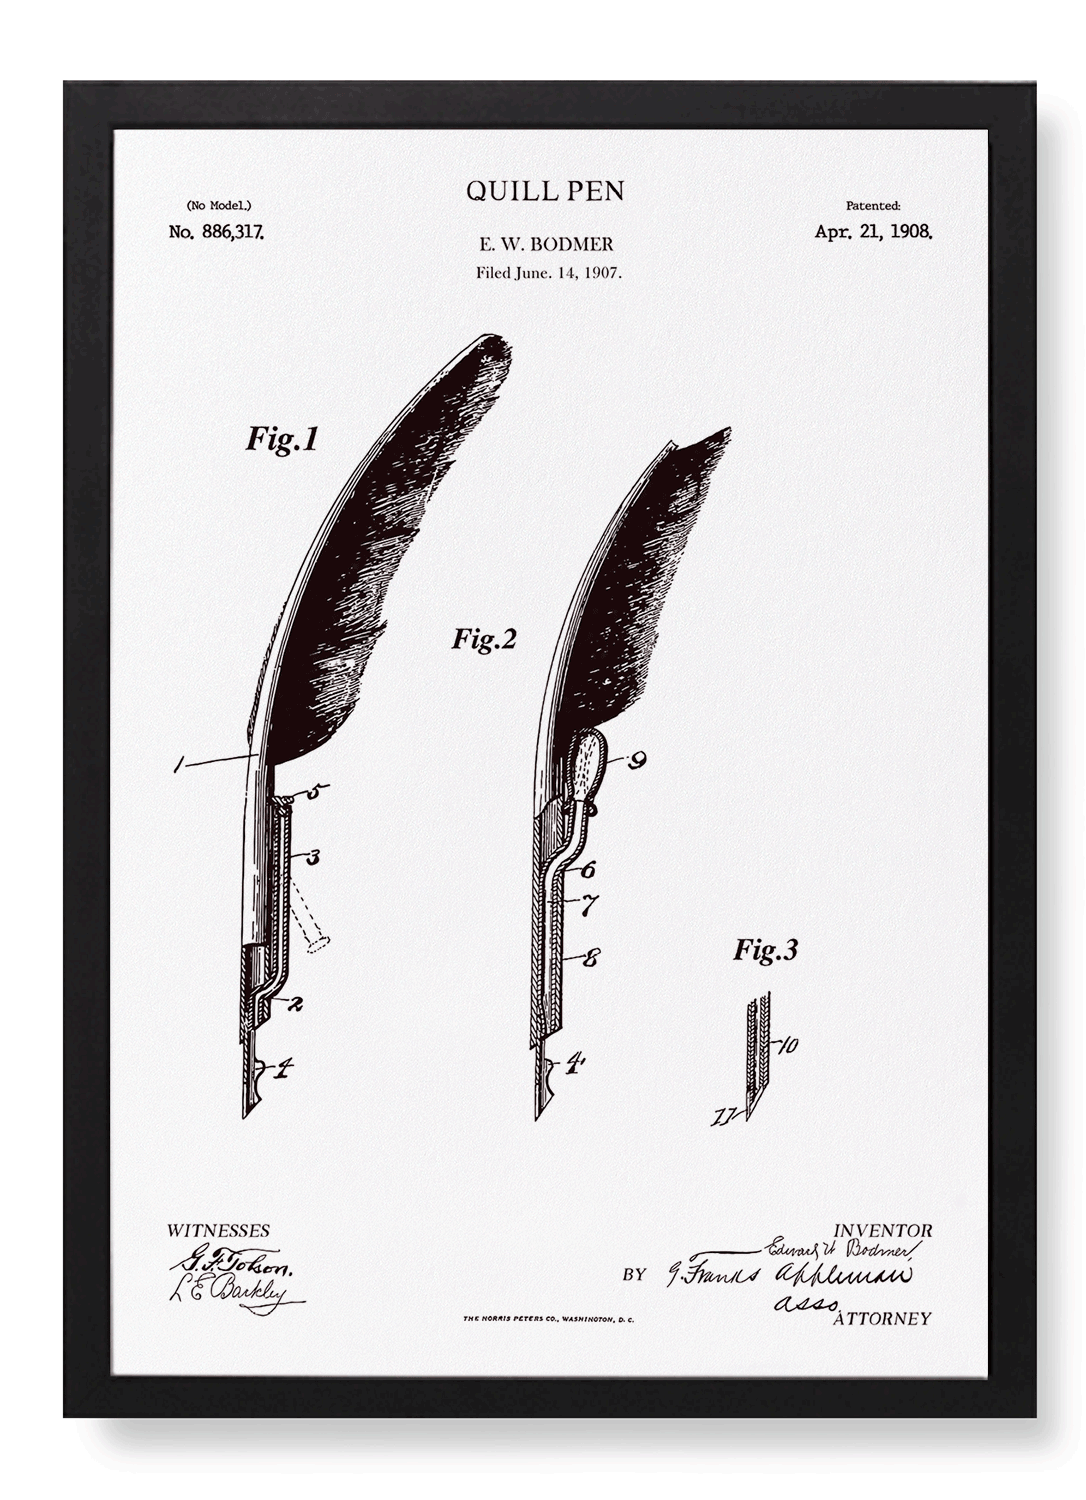 PATENT OF QUILL PEN (1908)